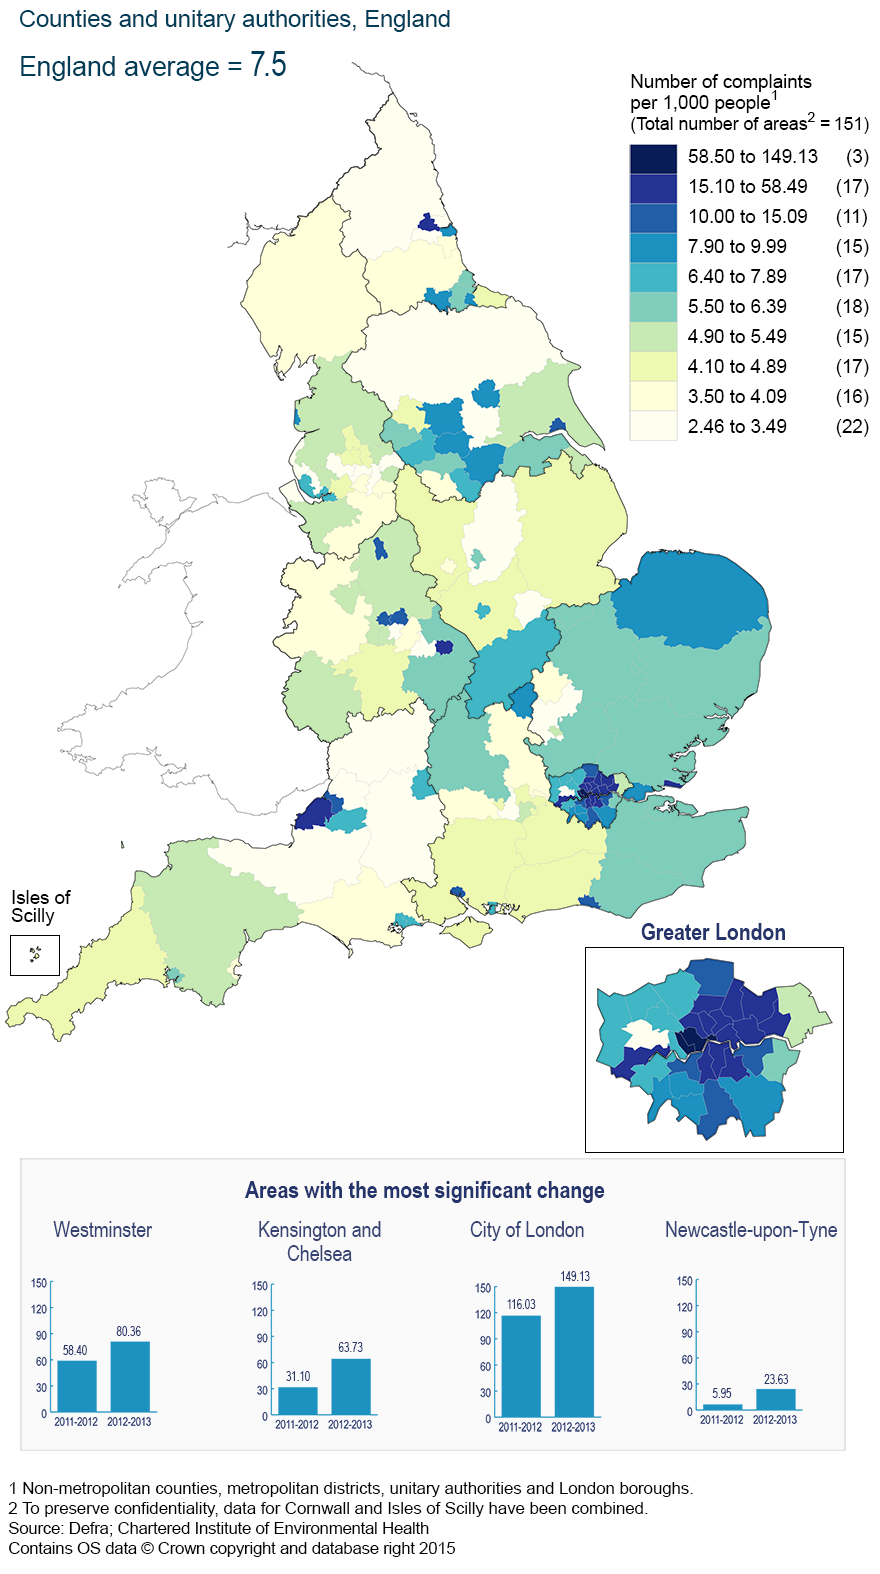 Figure 20.2 Number of complaints per 1,000 people by counties and unitary authorities, 2012–13 (1,2)